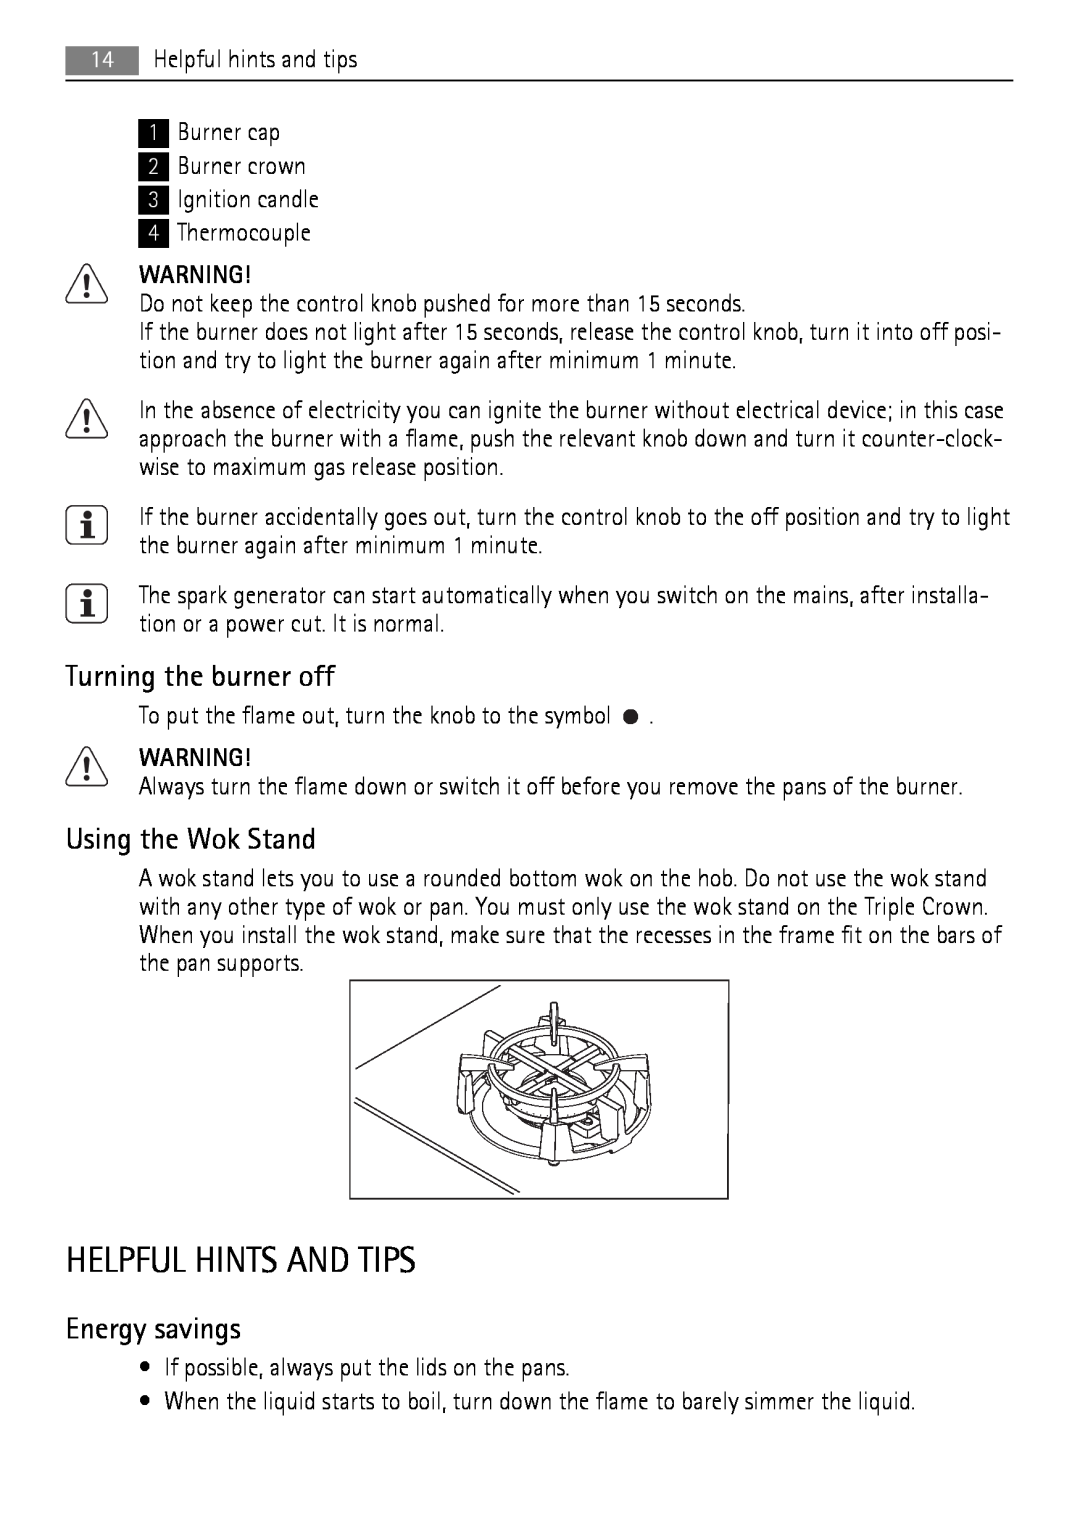 AEG HG654440SM user manual Helpful Hints And Tips, Turning the burner off, Using the Wok Stand, Energy savings 